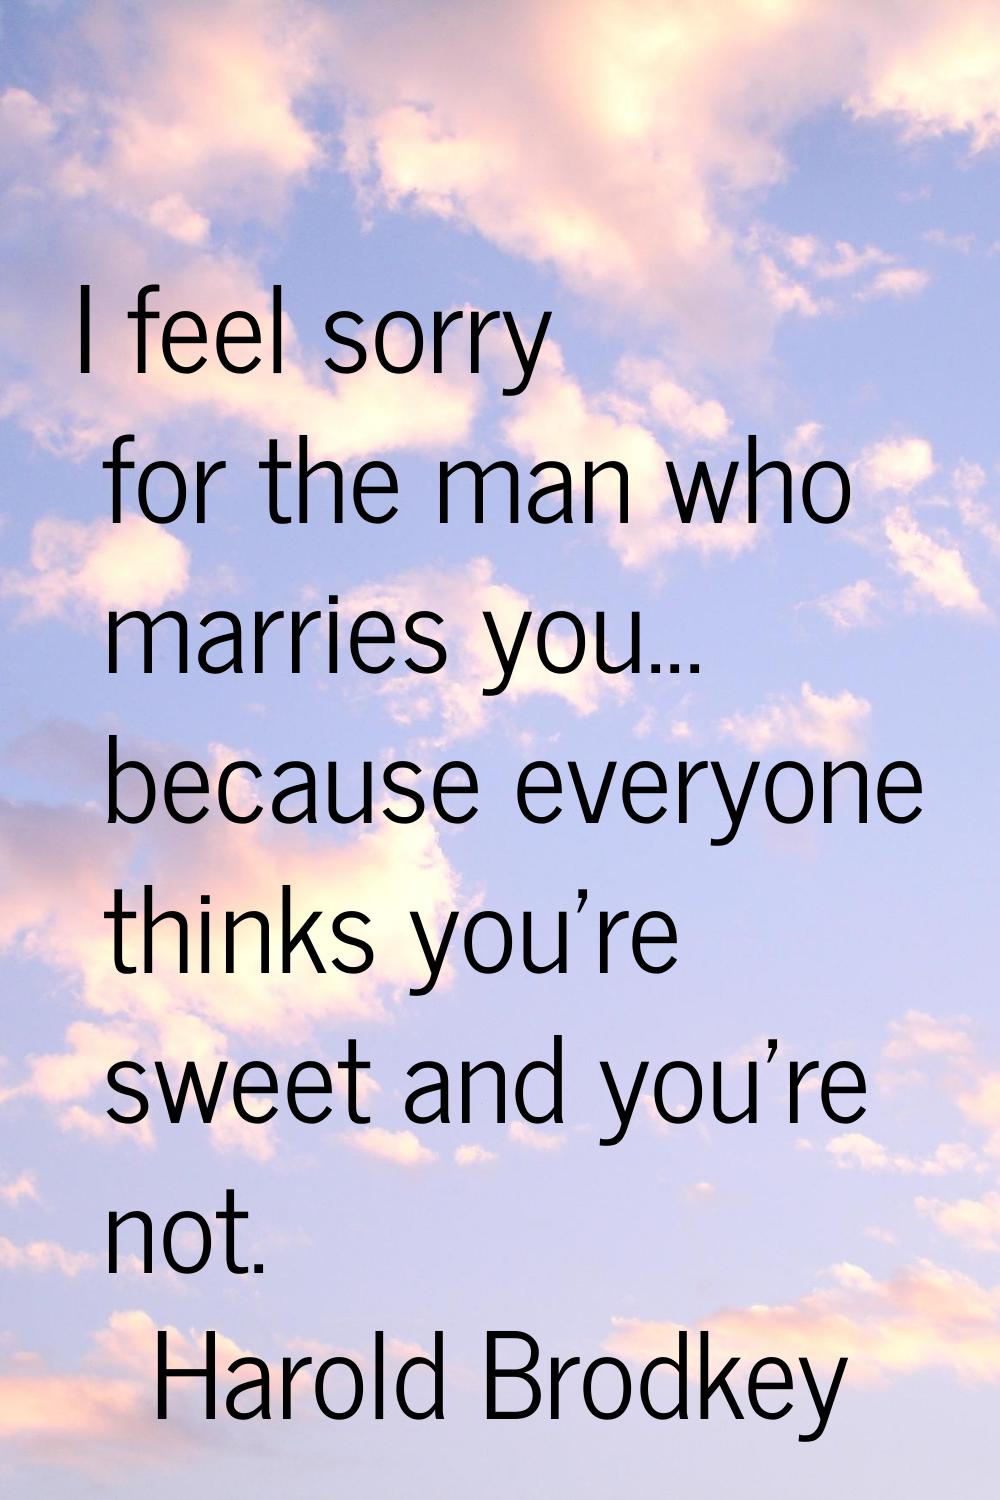 I feel sorry for the man who marries you... because everyone thinks you're sweet and you're not.